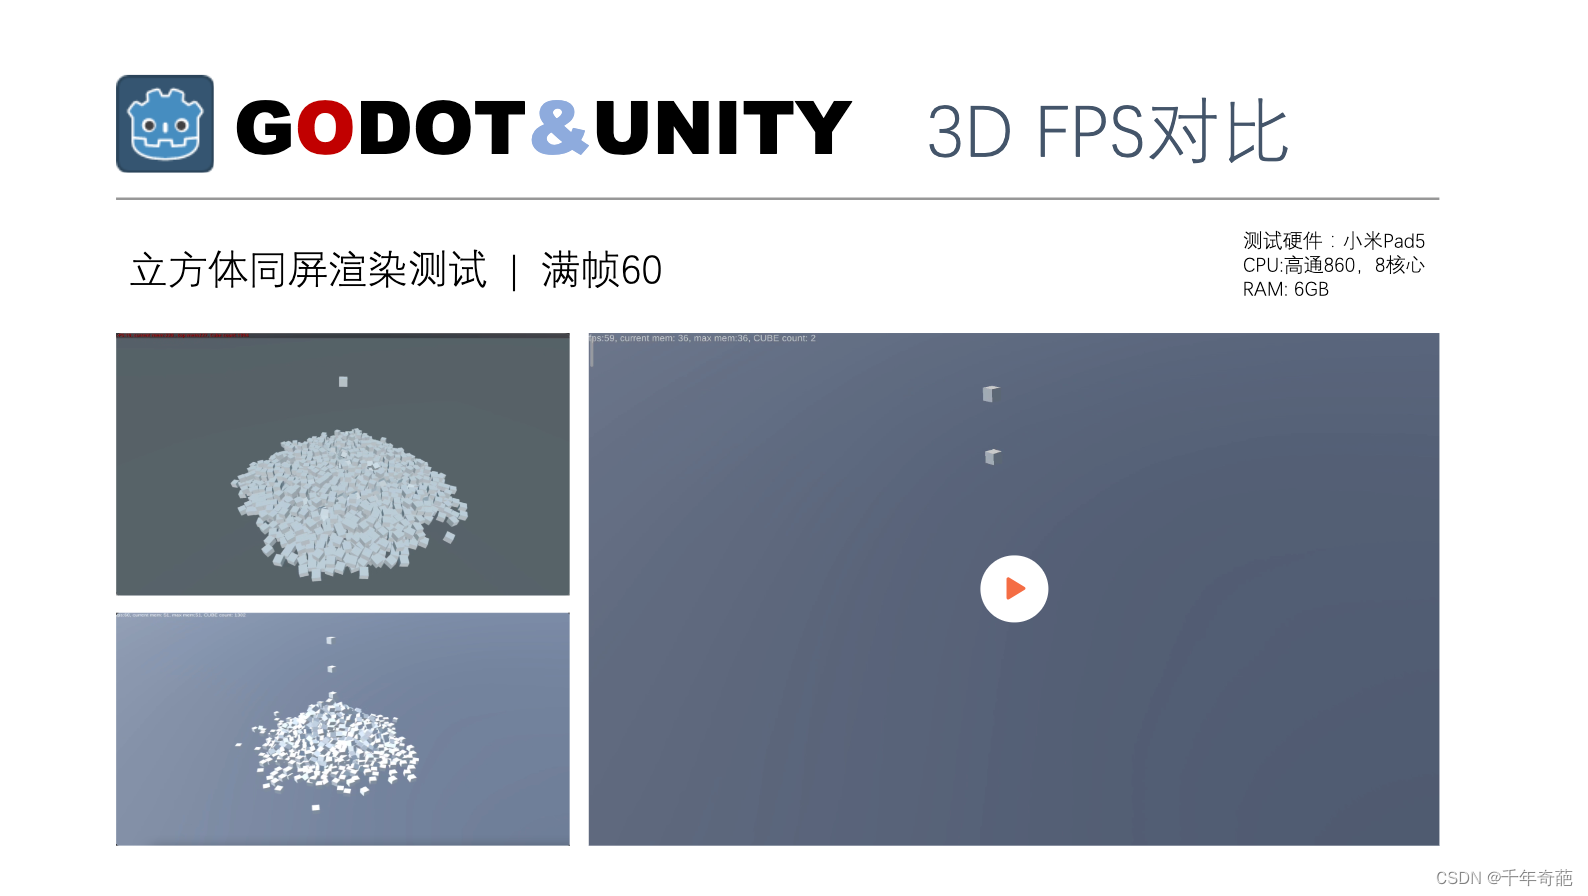 Introduction to GODOT game engine, including performance comparison test with unity, as well as selection recommendations